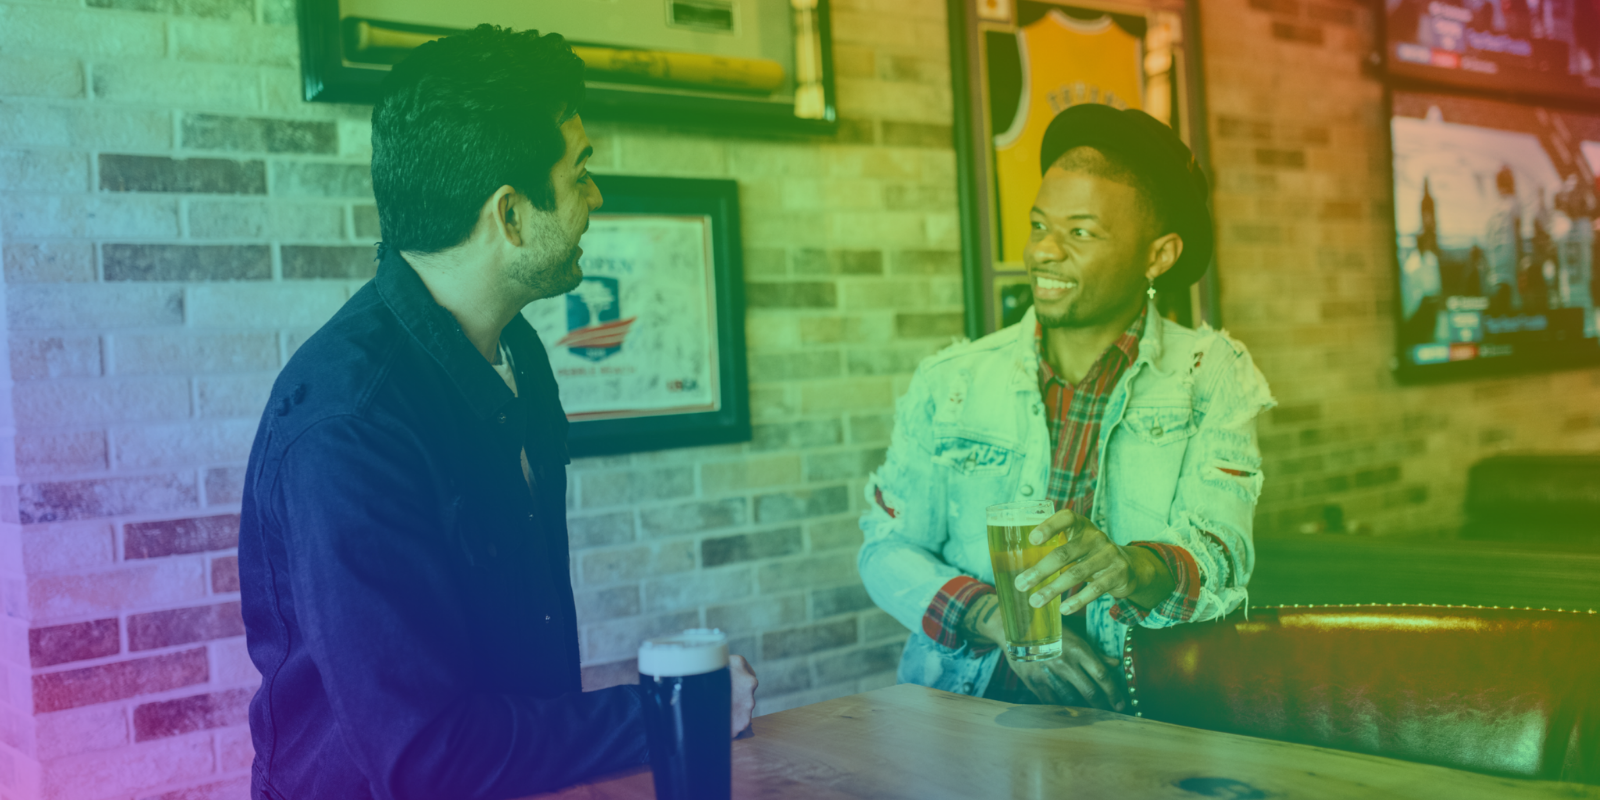 Two guys socializing over beer with a rainbow gradient over the image